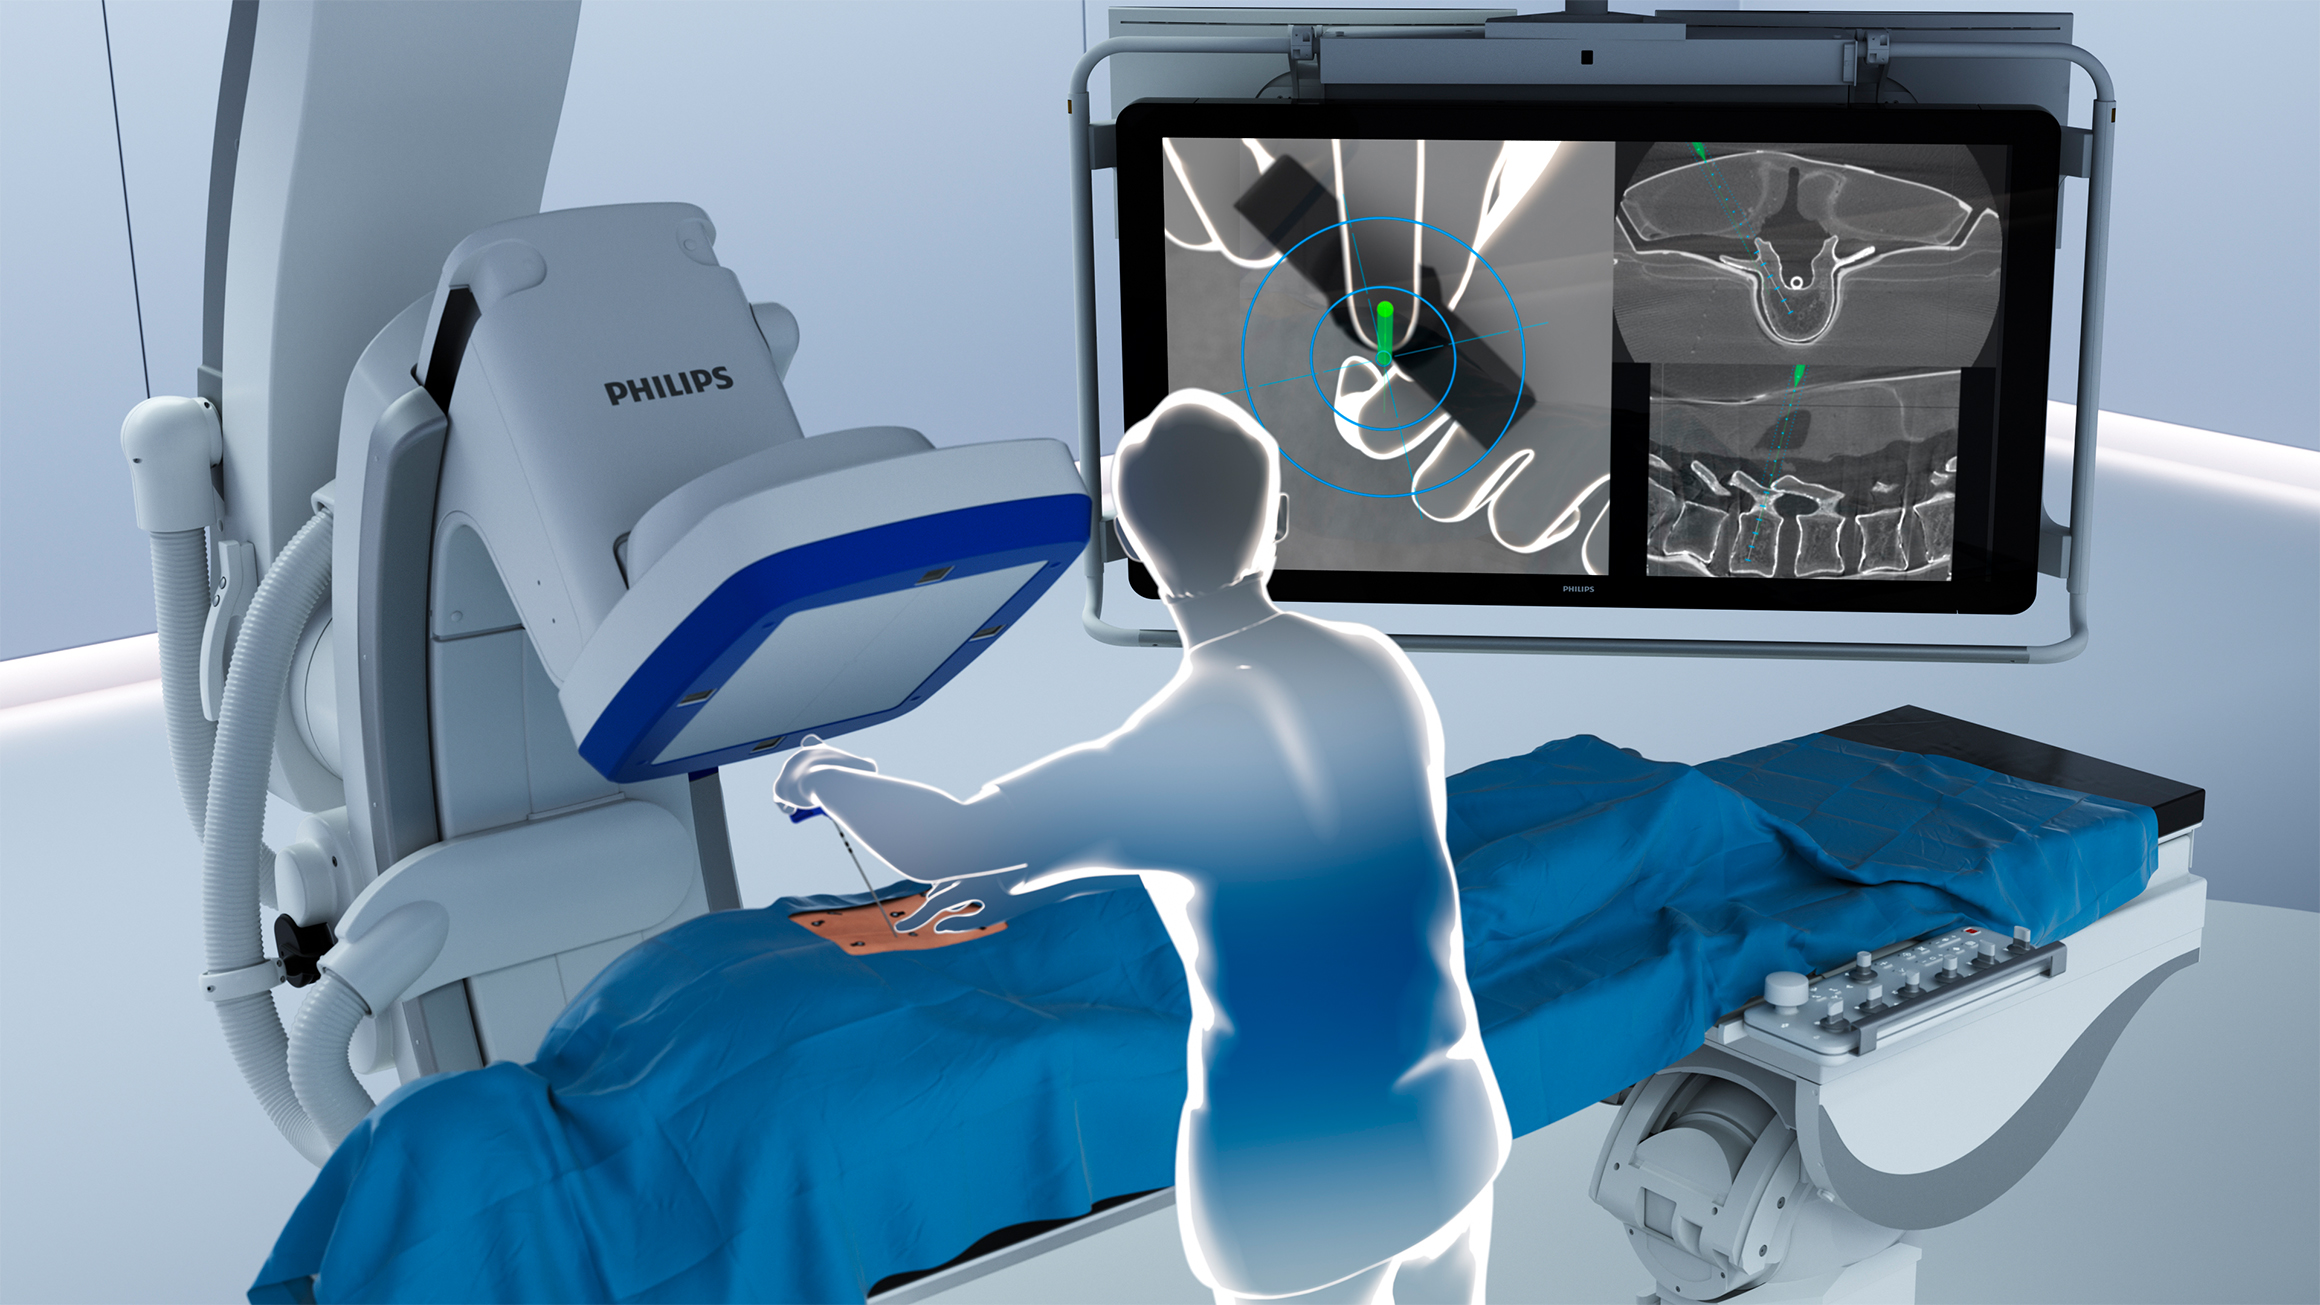 Image for Philips Introduces ClarifEye Augmented Reality Surgical Navigation To Advance Minimally-Invasive Spine Procedures